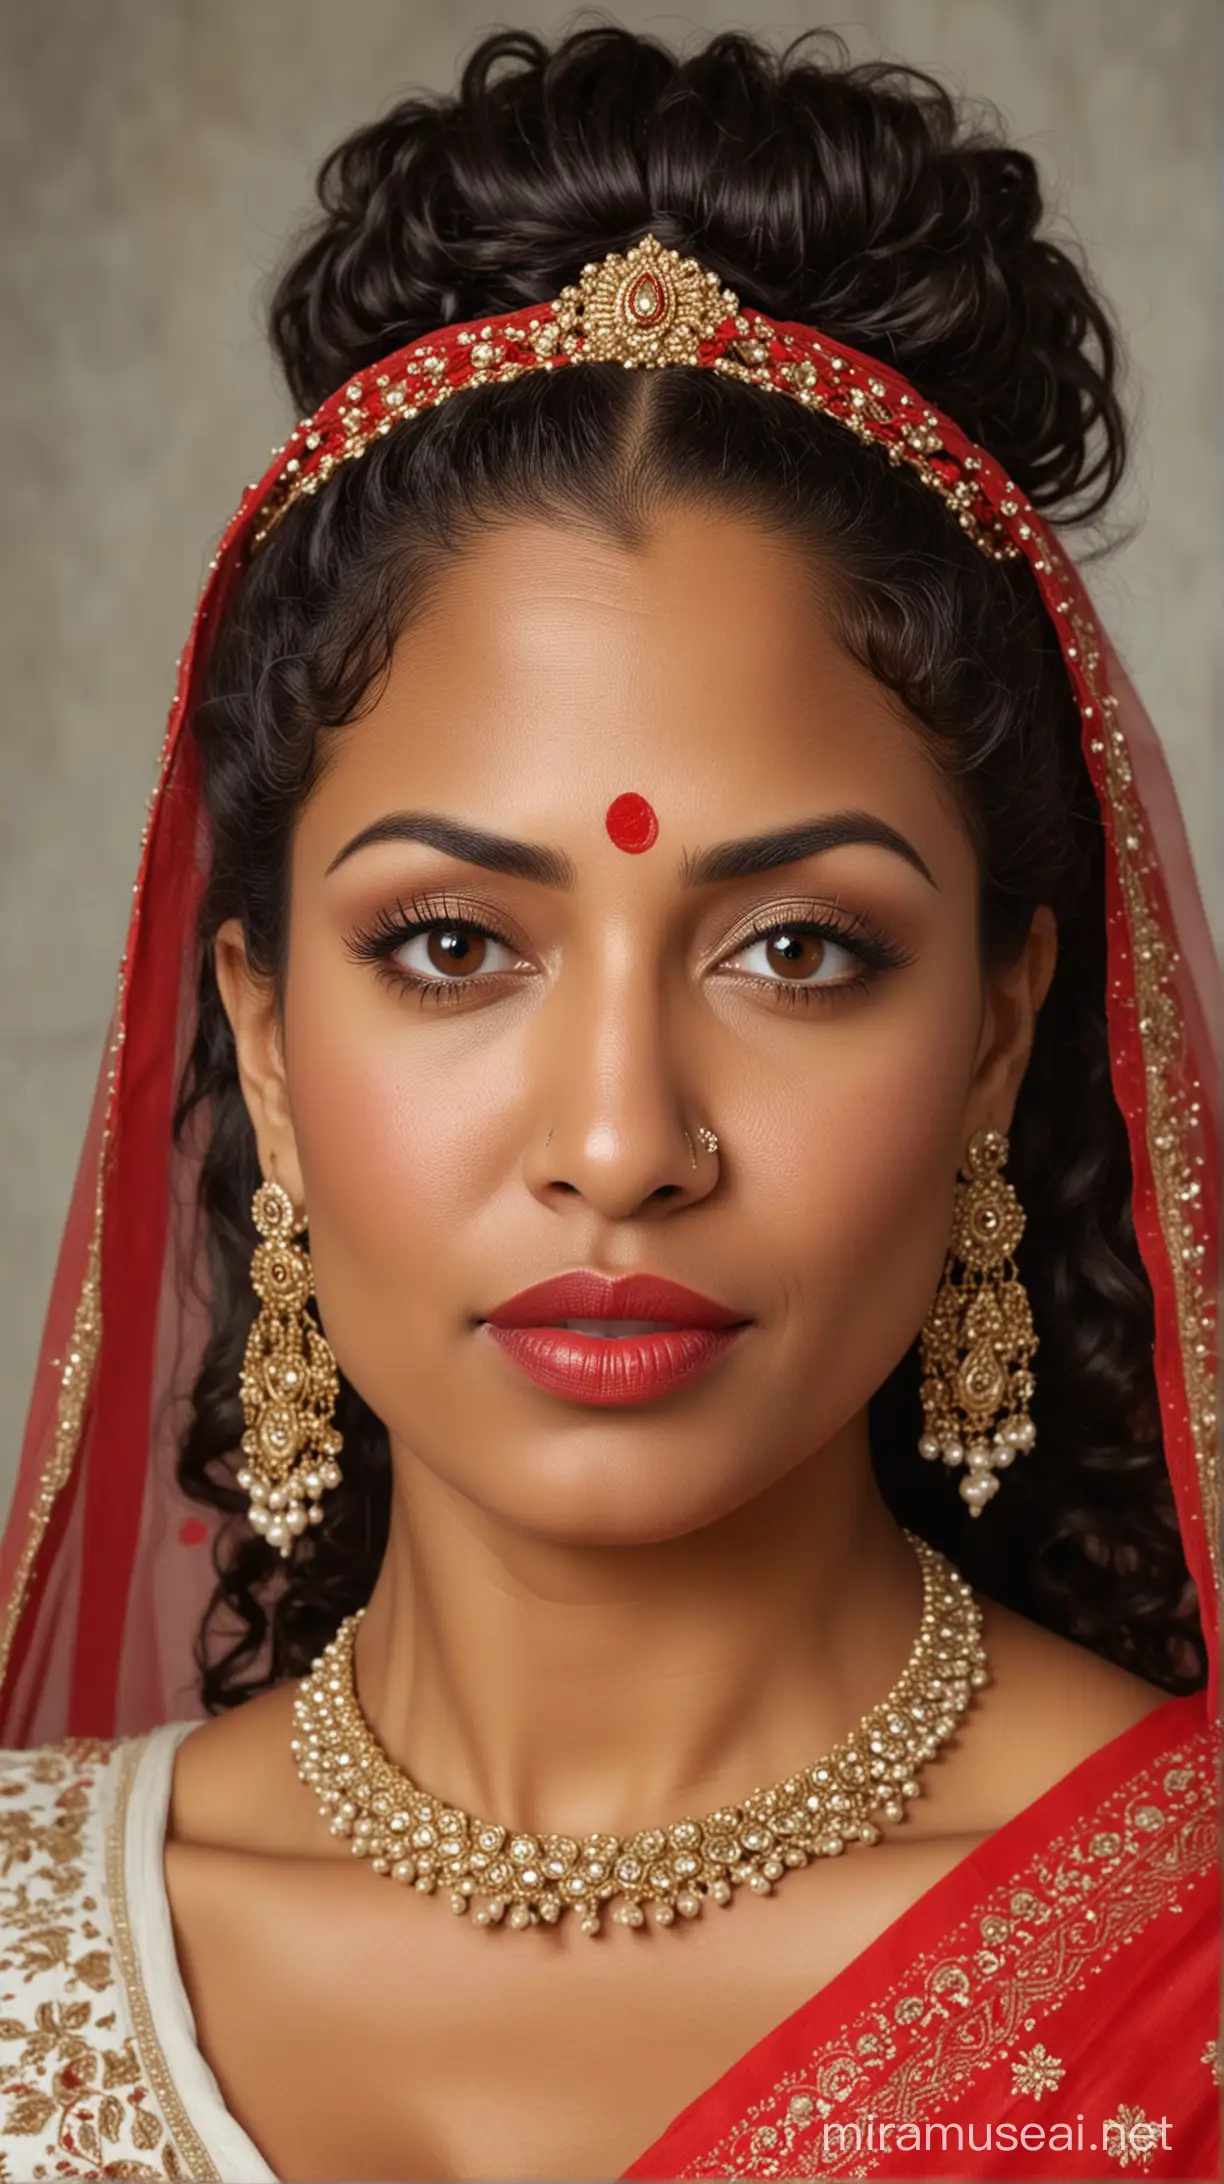 A 52 years old black woman with small eyes, straight nose, weak chin, small red lips and long curly hair with a bun at back wearing an Indian bridal dress